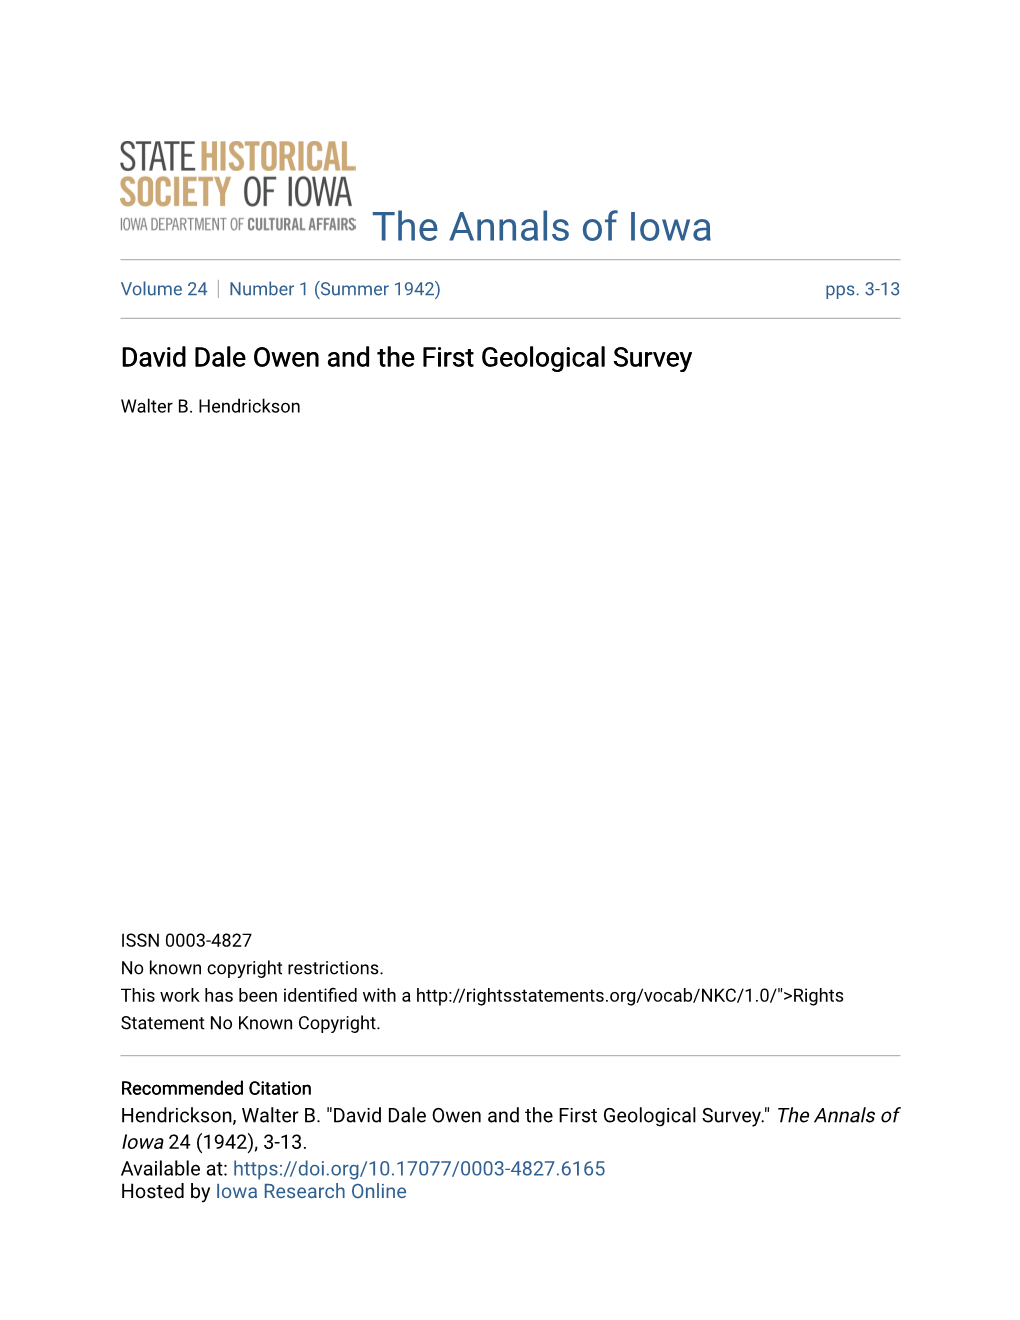 David Dale Owen and the First Geological Survey